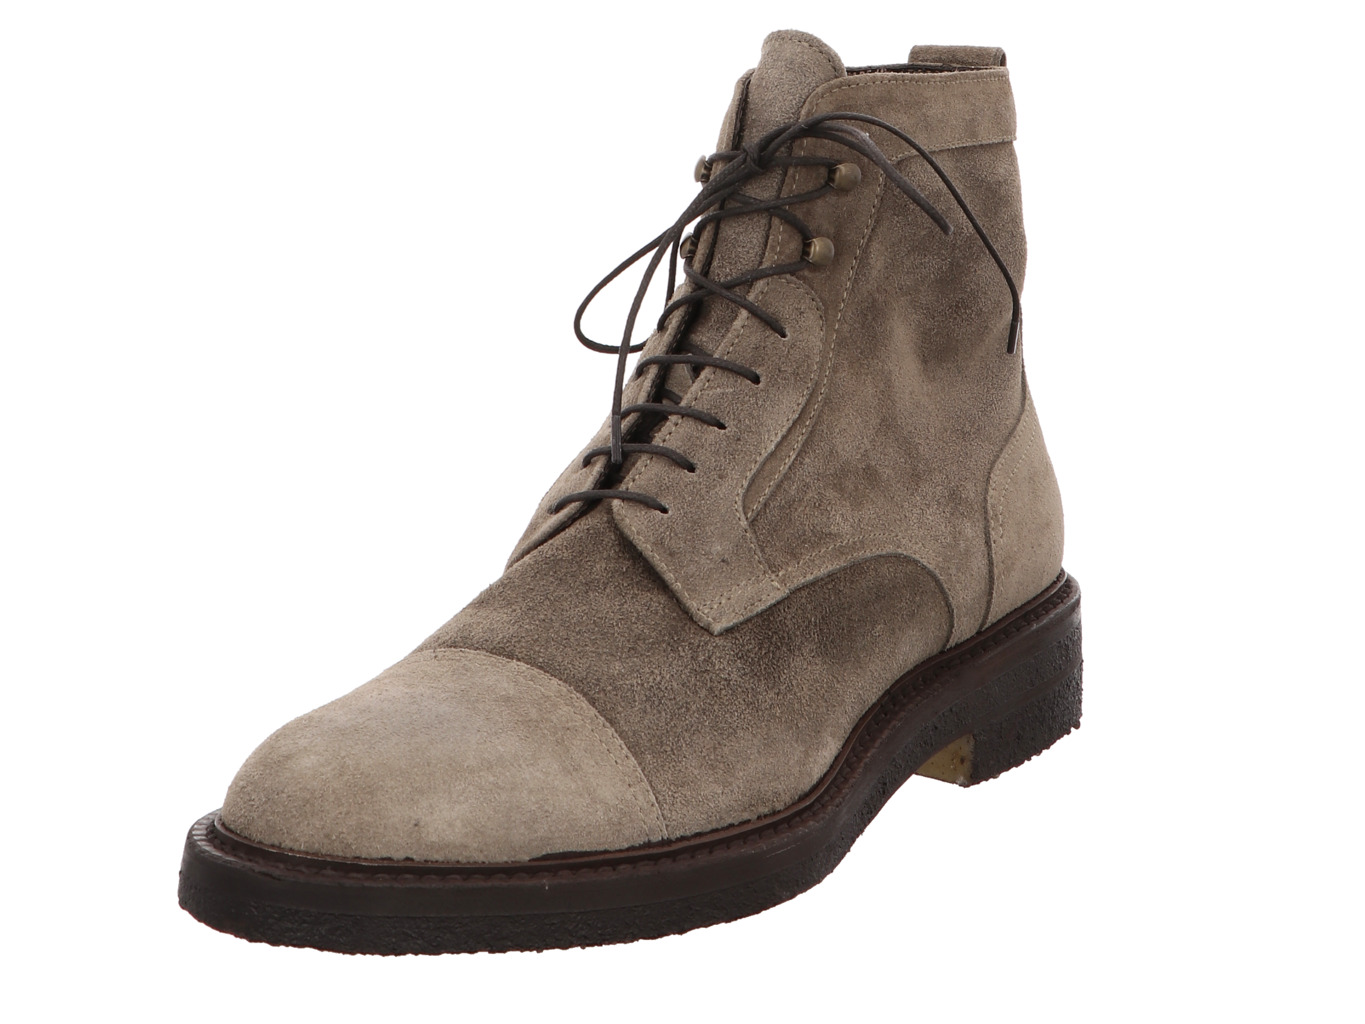 H.Boots warm taupe